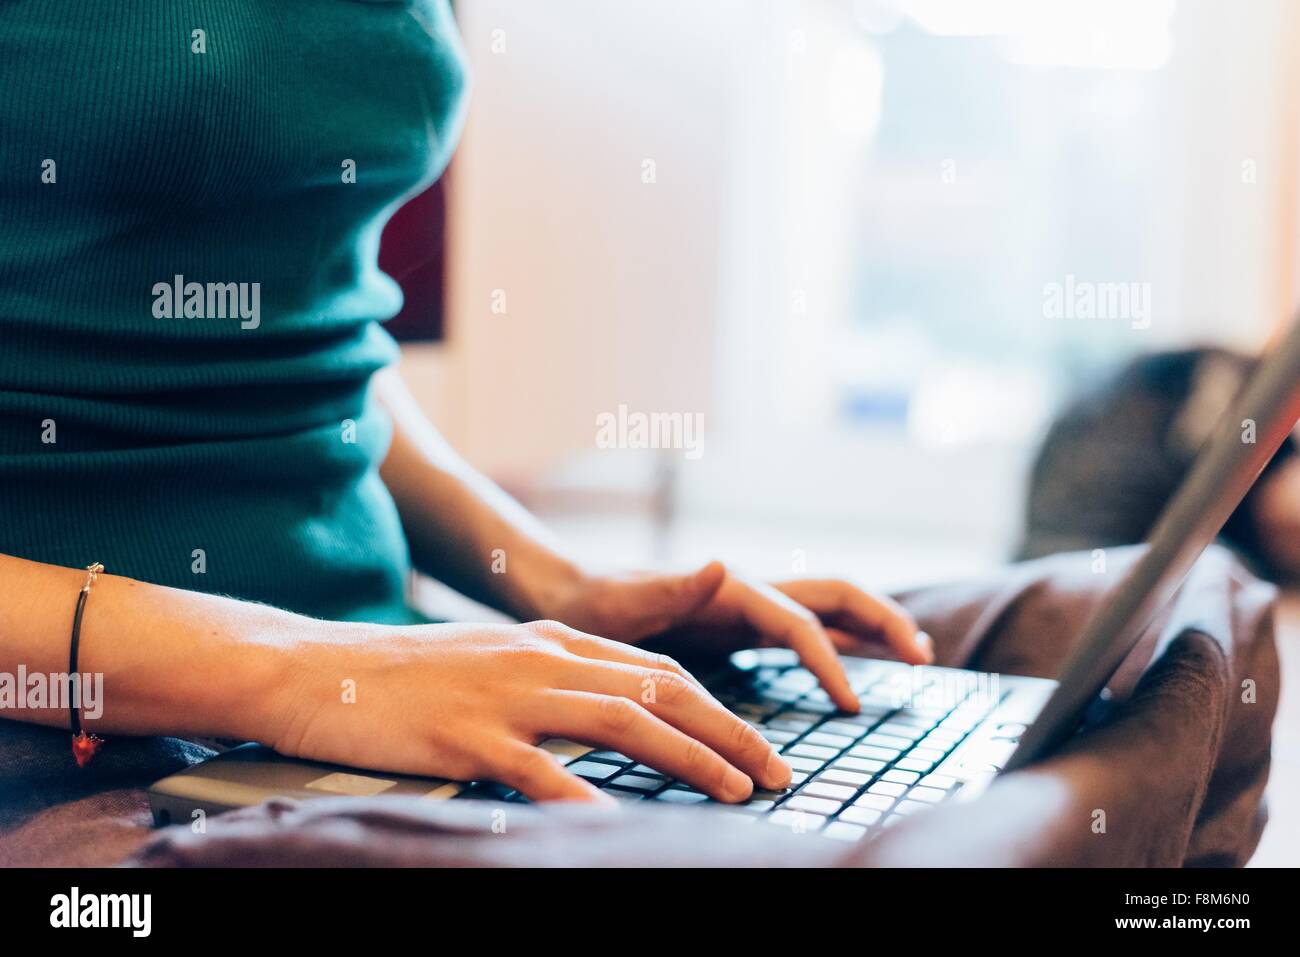 Cropped mid section of mid adult woman typing on laptop computer Banque D'Images